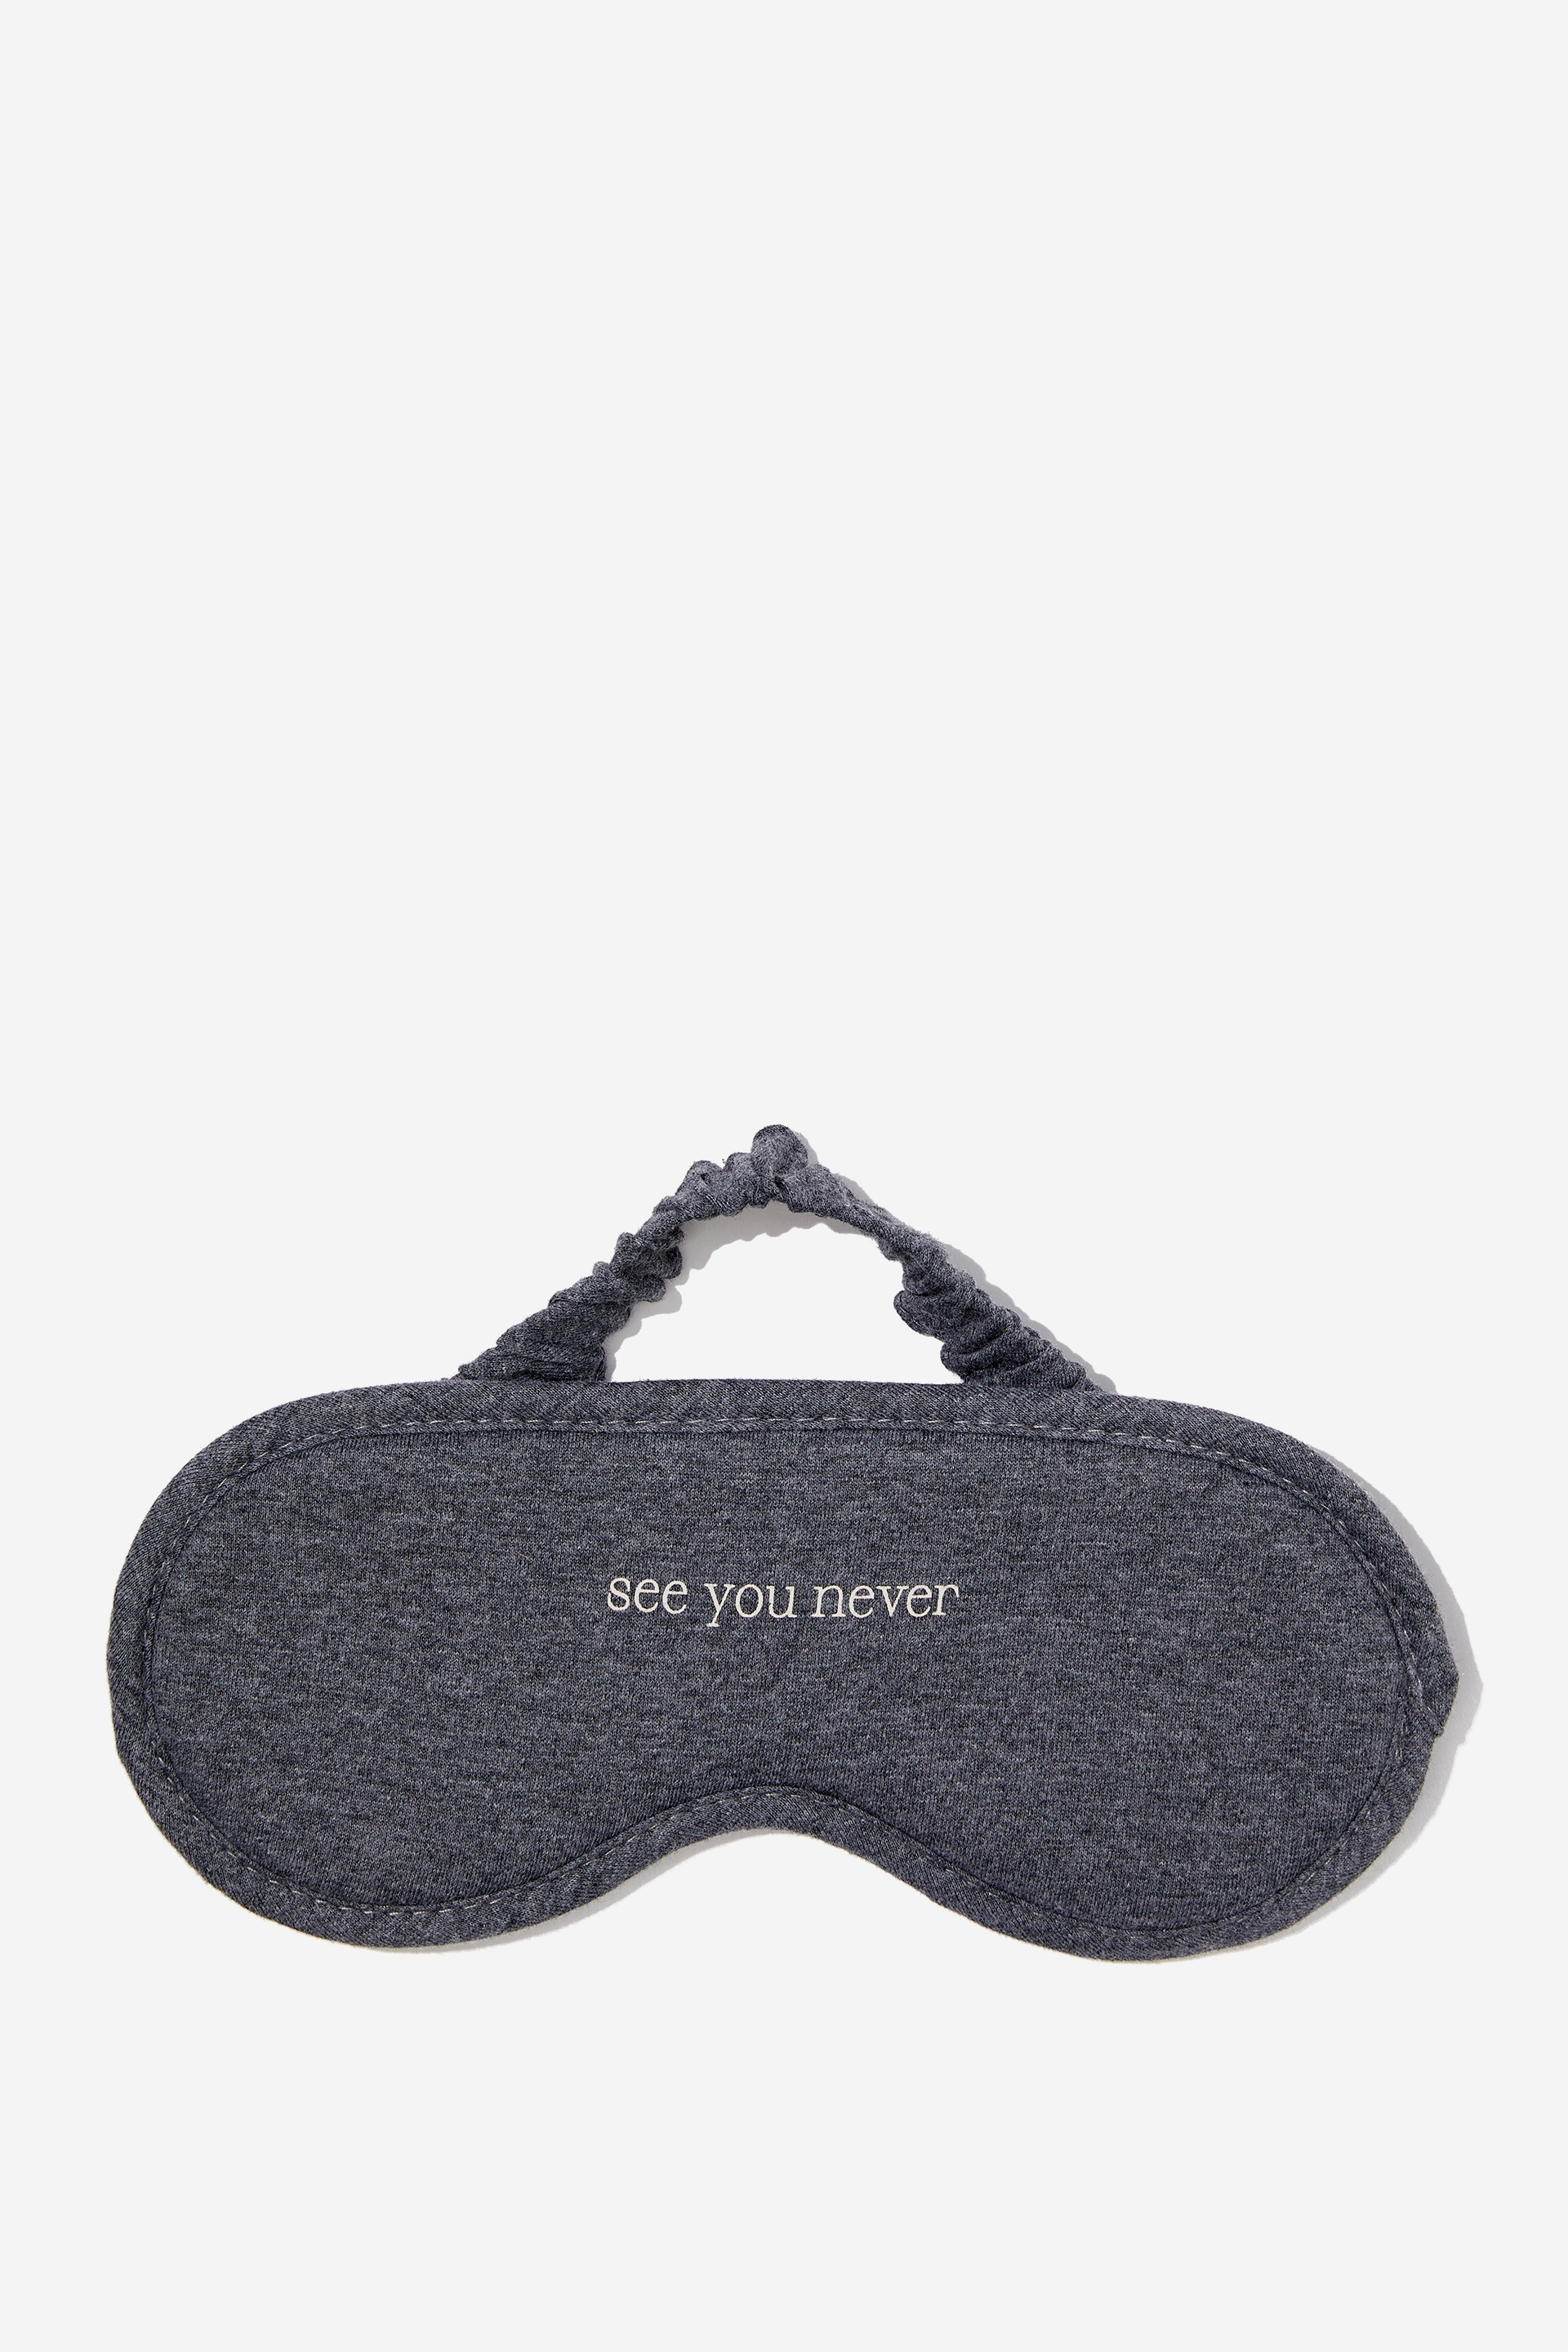 Typo - Off The Grid Eyemask - See you never / grey marle